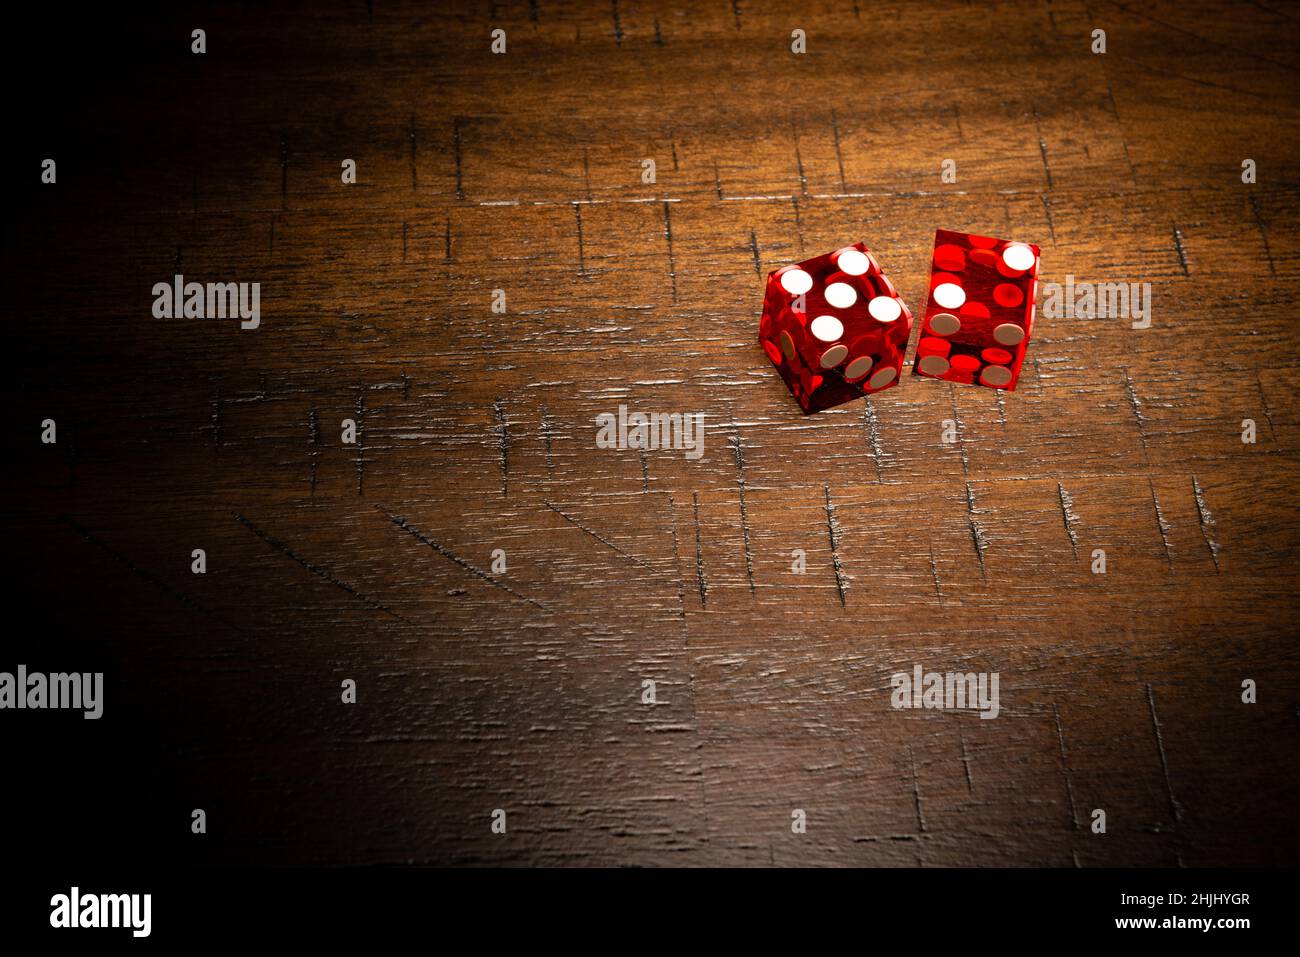 Professional casino-style dice on a wooden table with high-key lighting. Stock Photo